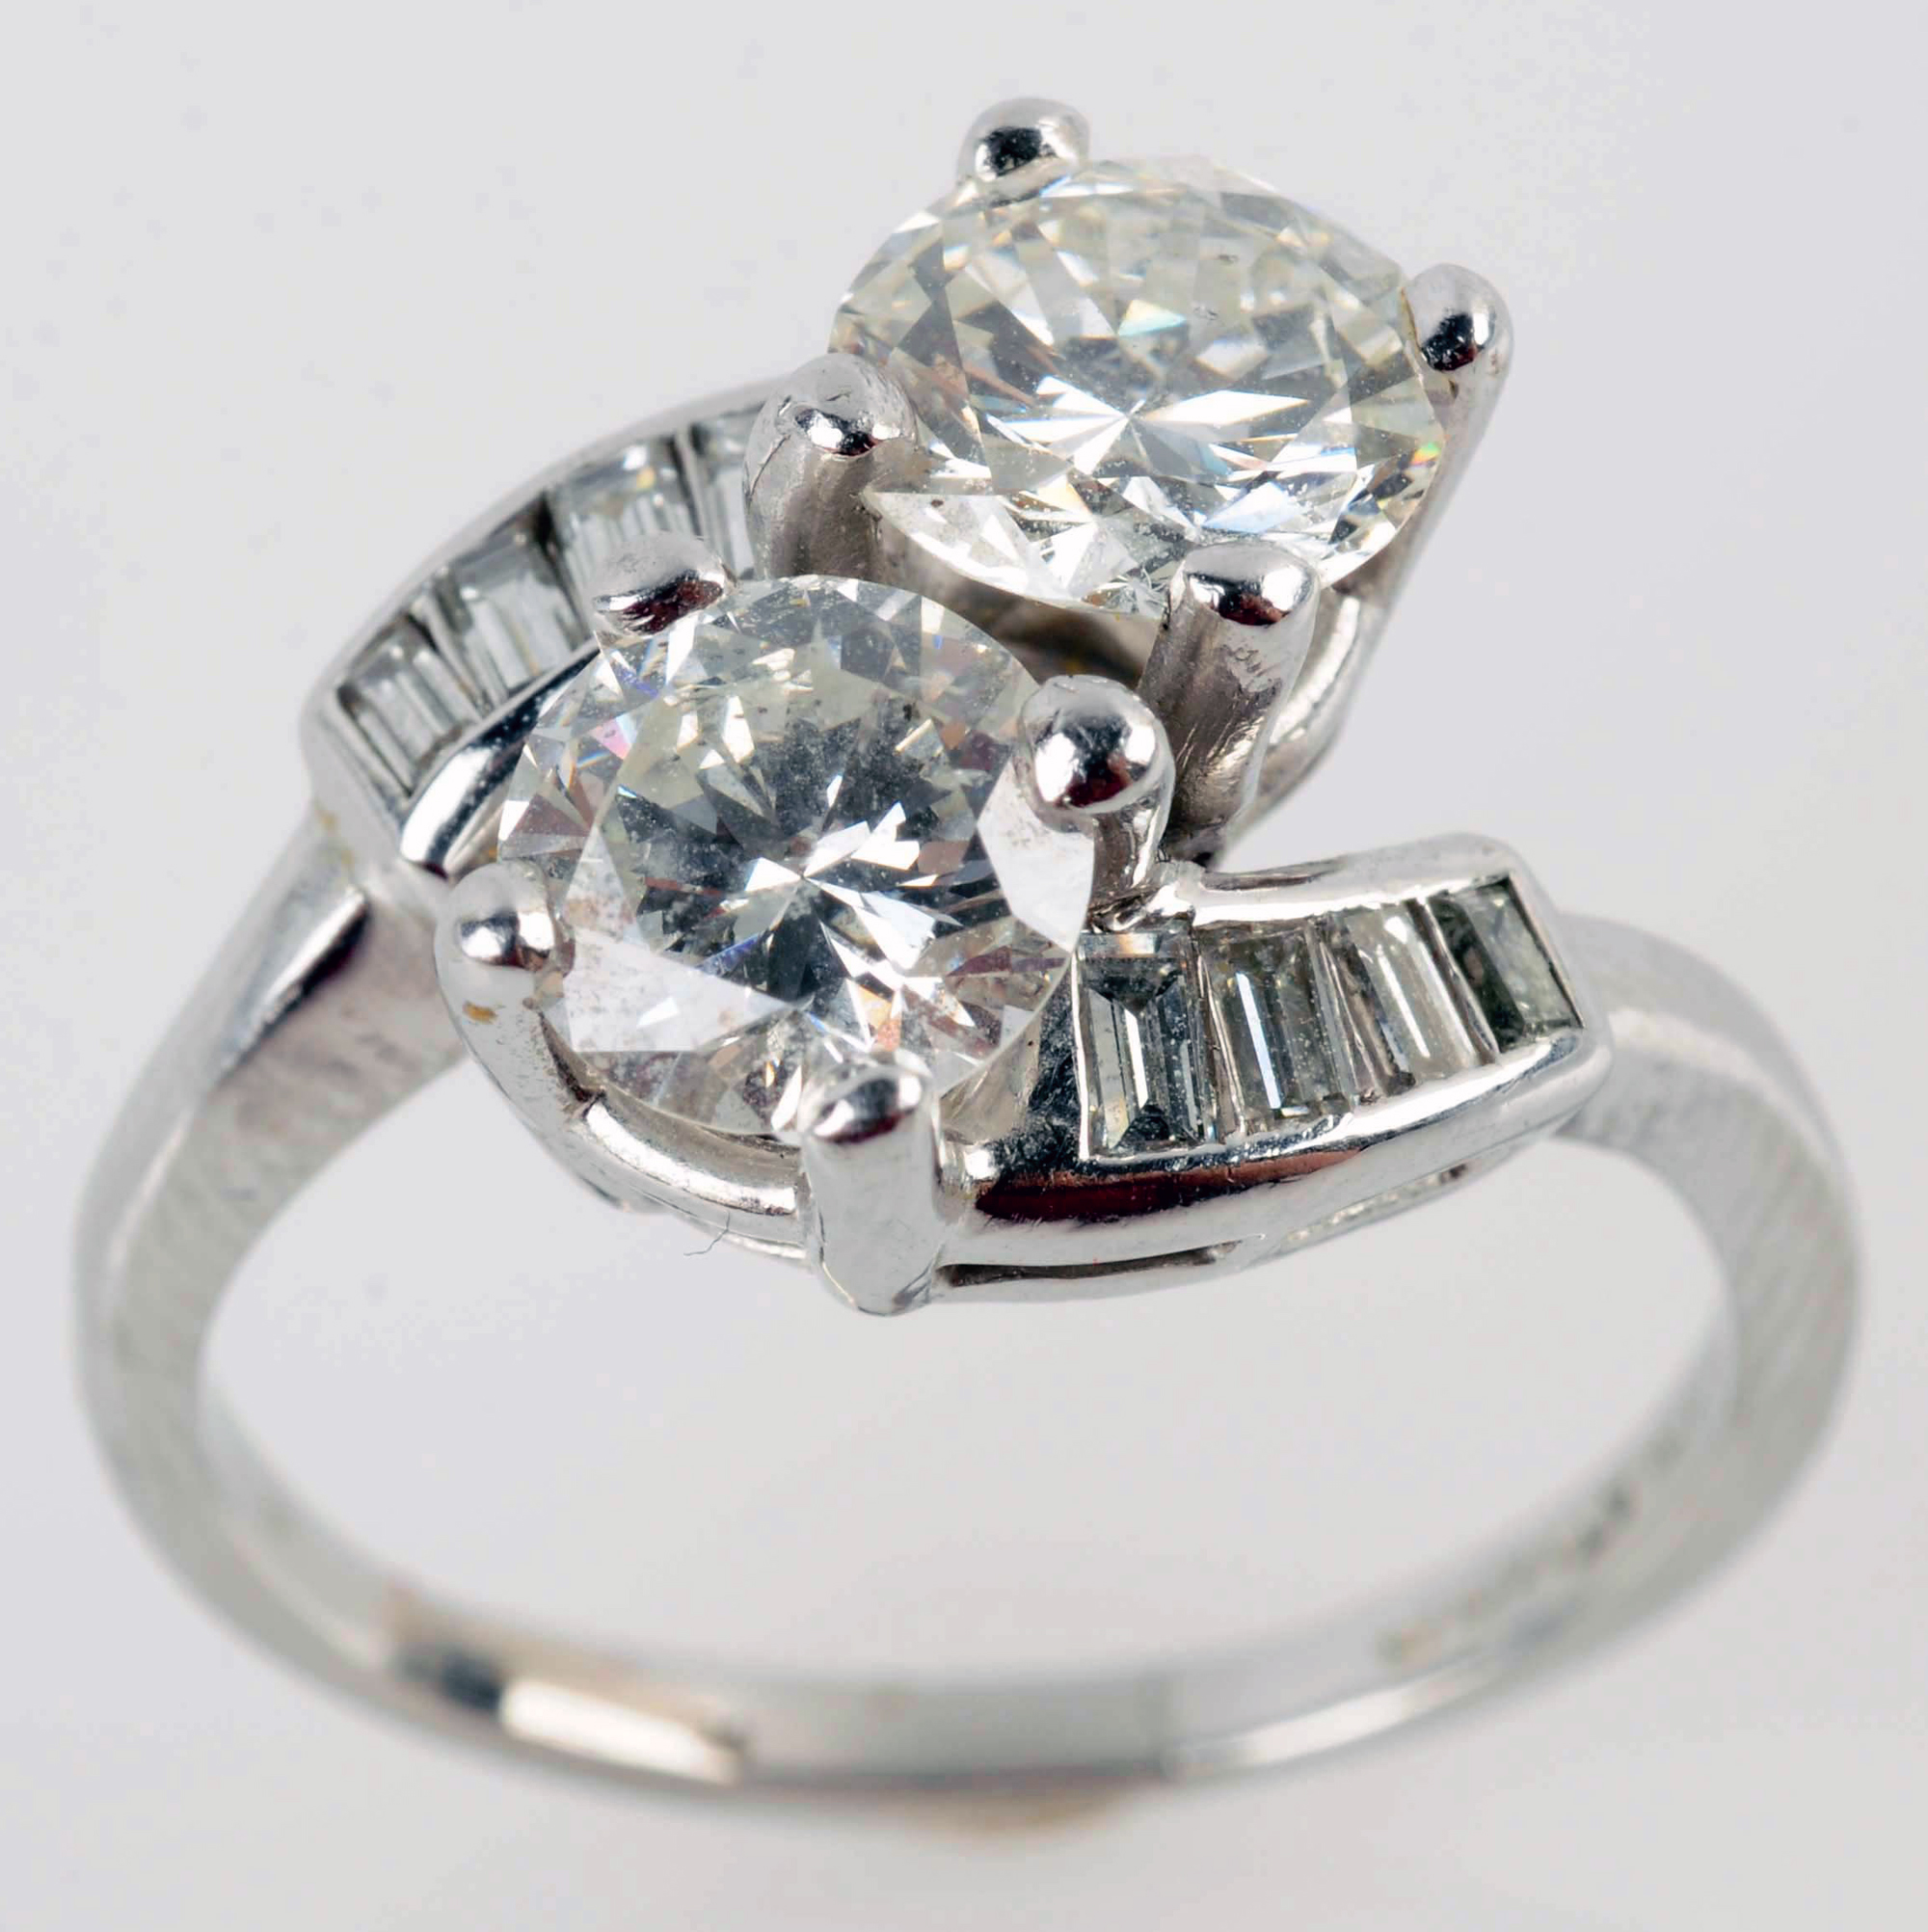 Diamond dinner ring in platinum setting, two large diamonds flanked by eight tapered, baguette-cut diamonds. Diamonds are approximately 1.00ct and 1.15ct, VS2 - SI1 clarities, L-M colors, ring size 8, 5.0 dwt. Estimate: $2,500-$4,000. Morphy Auctions image